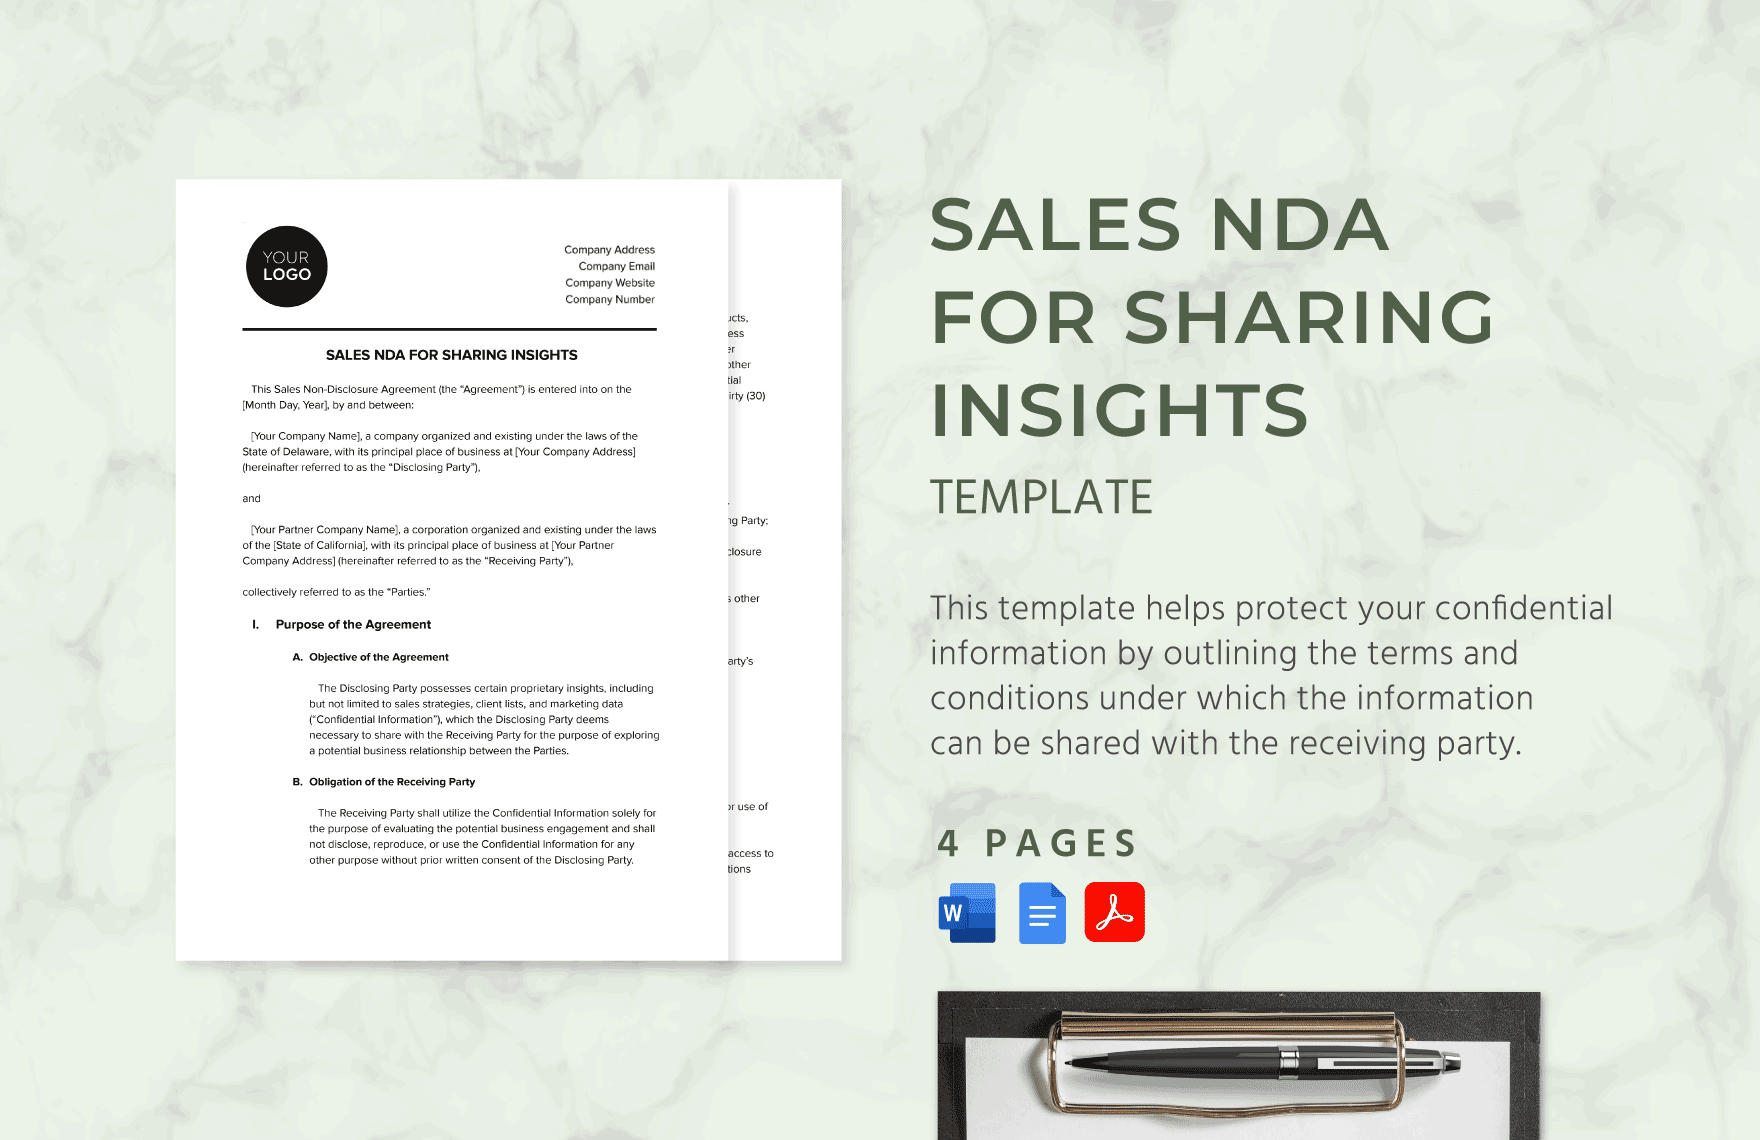 Sales NDA for Sharing Insights Template